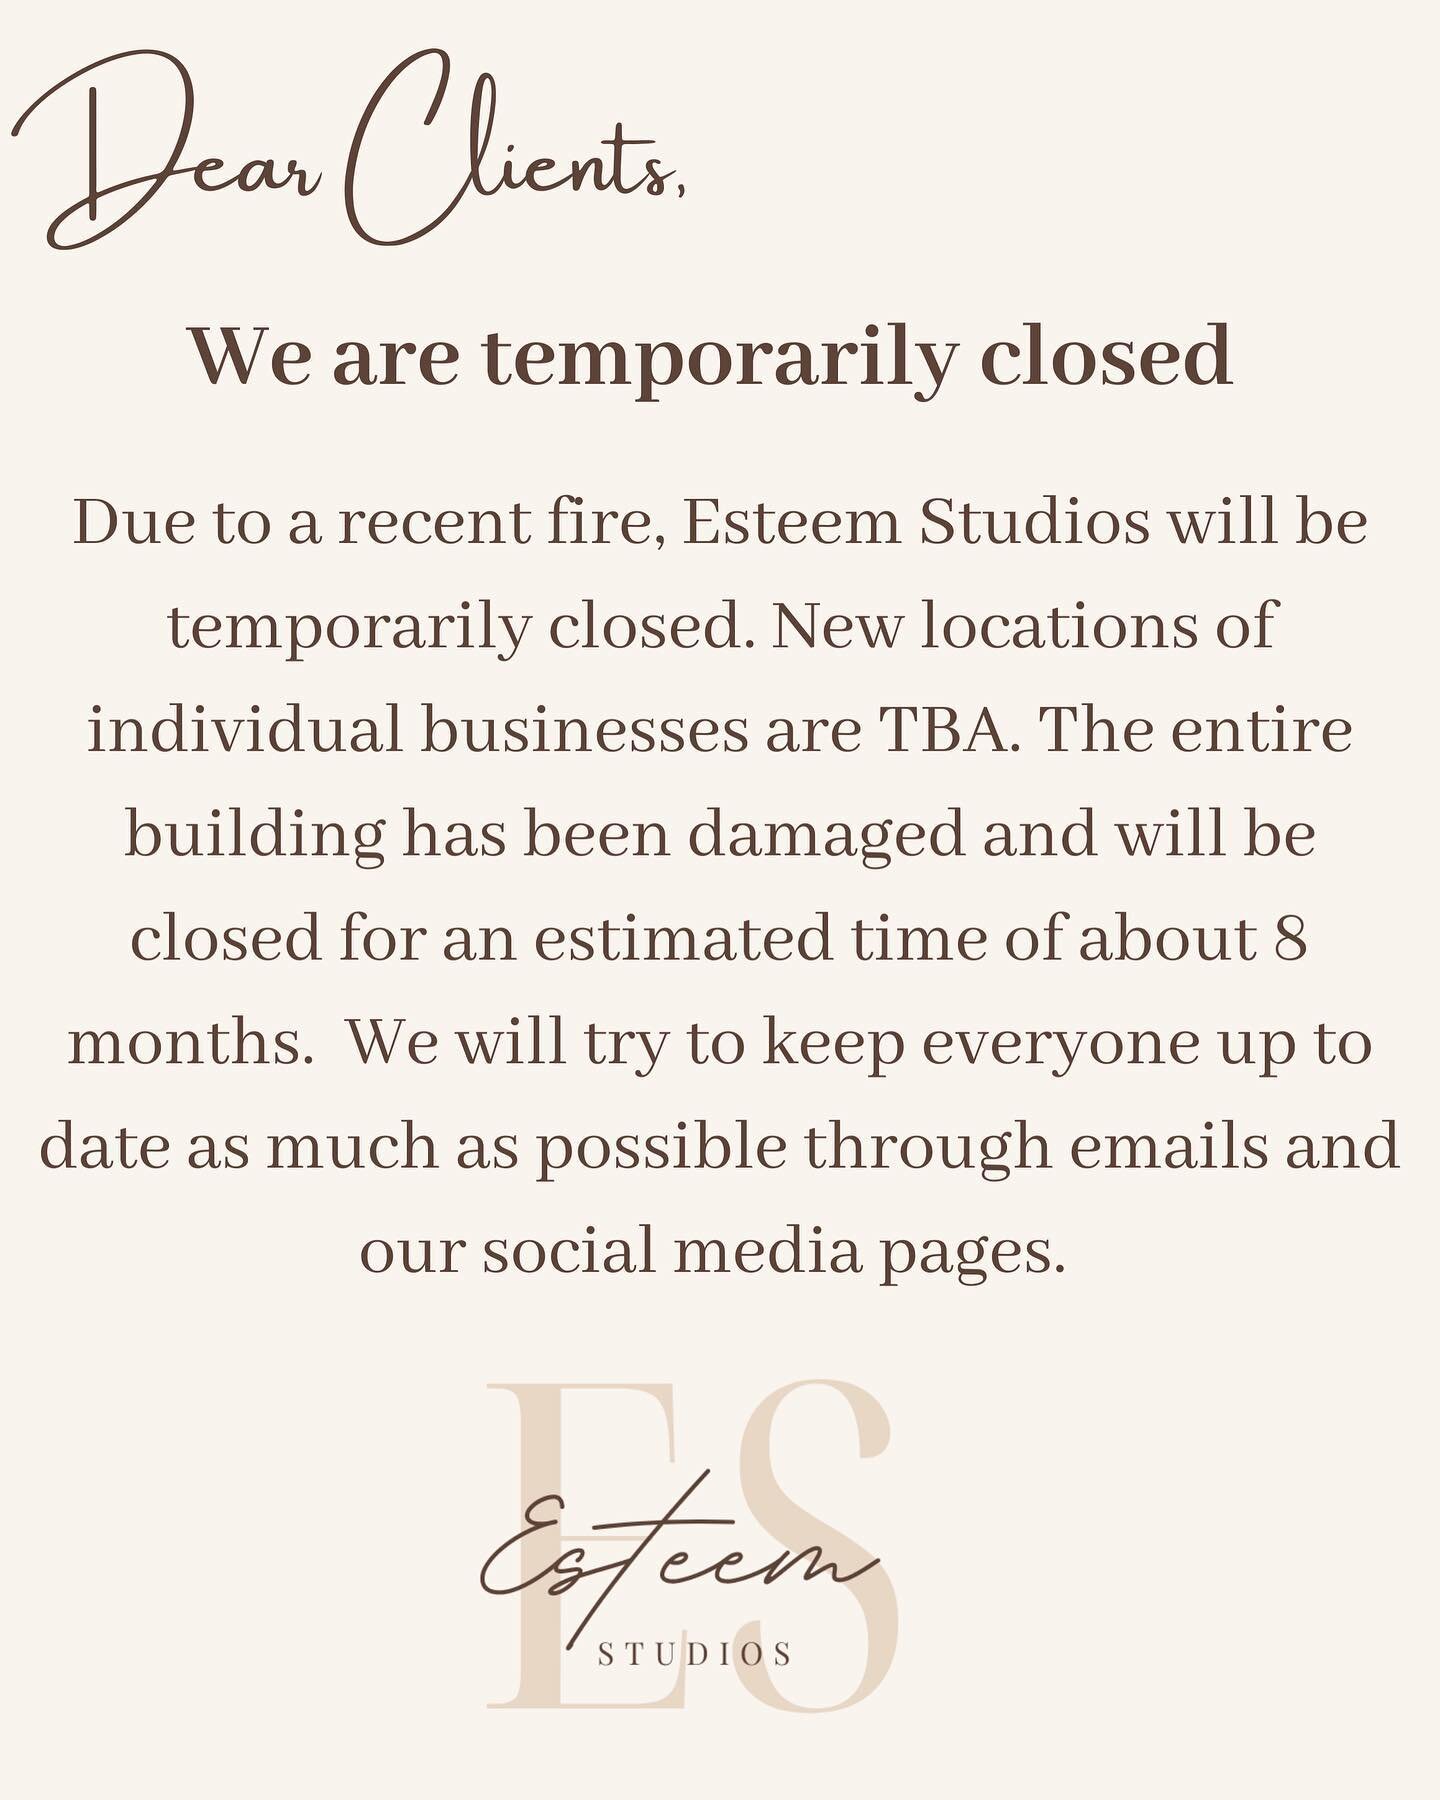 It&rsquo;s with a heavy heart that I announce the temporary closure of Esteem Studios 💔

On Tuesday morning when I went to work and unlocked the front door, smoke came pouring out. We called the fire department and they discovered there was a fire i